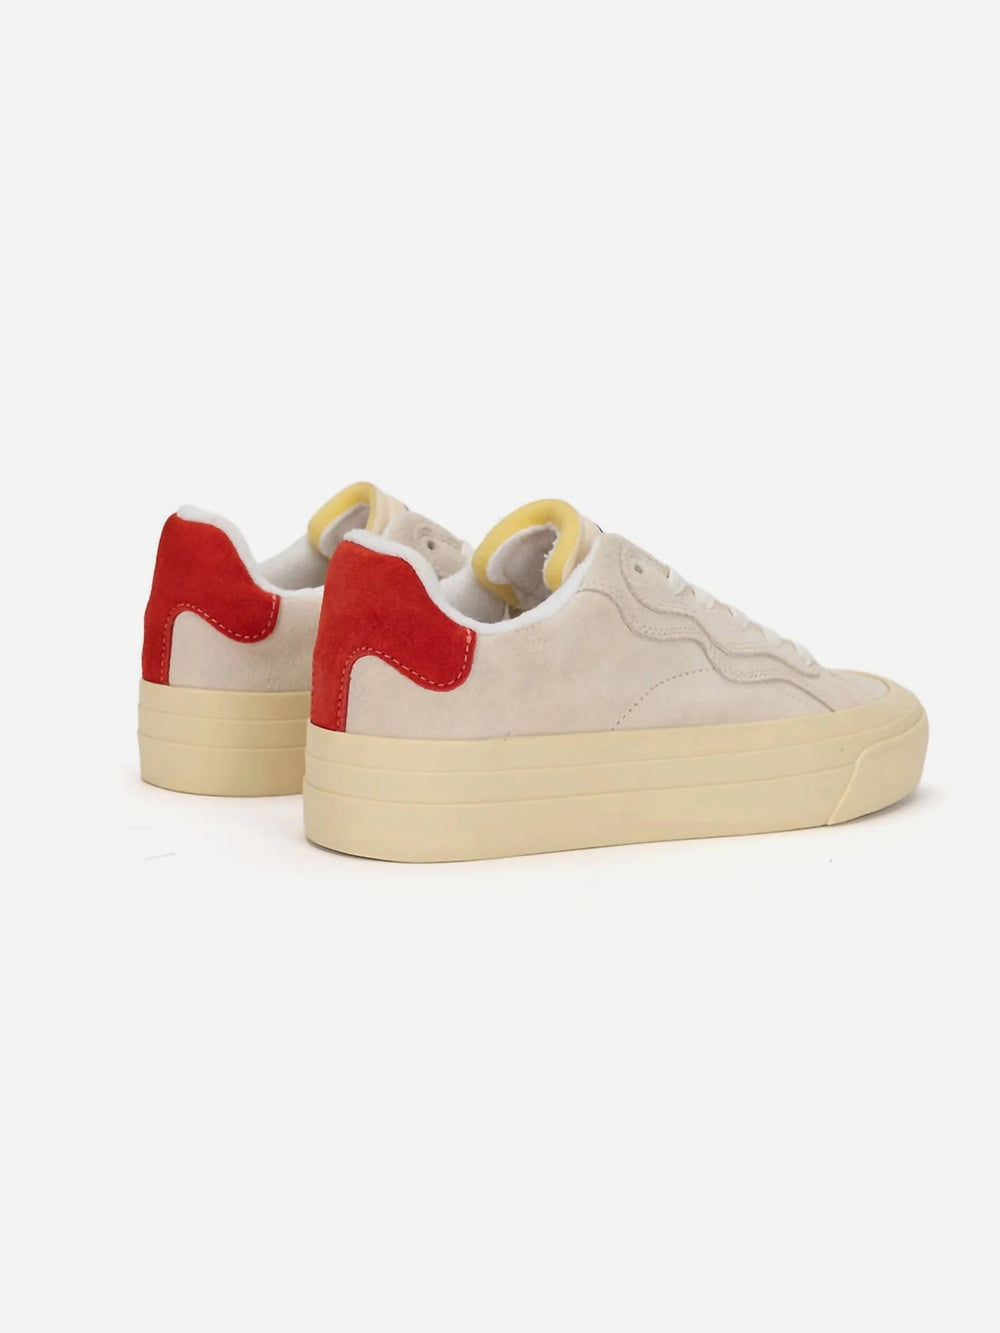 Off White/Red No Name Suede Brand Black Sneakers